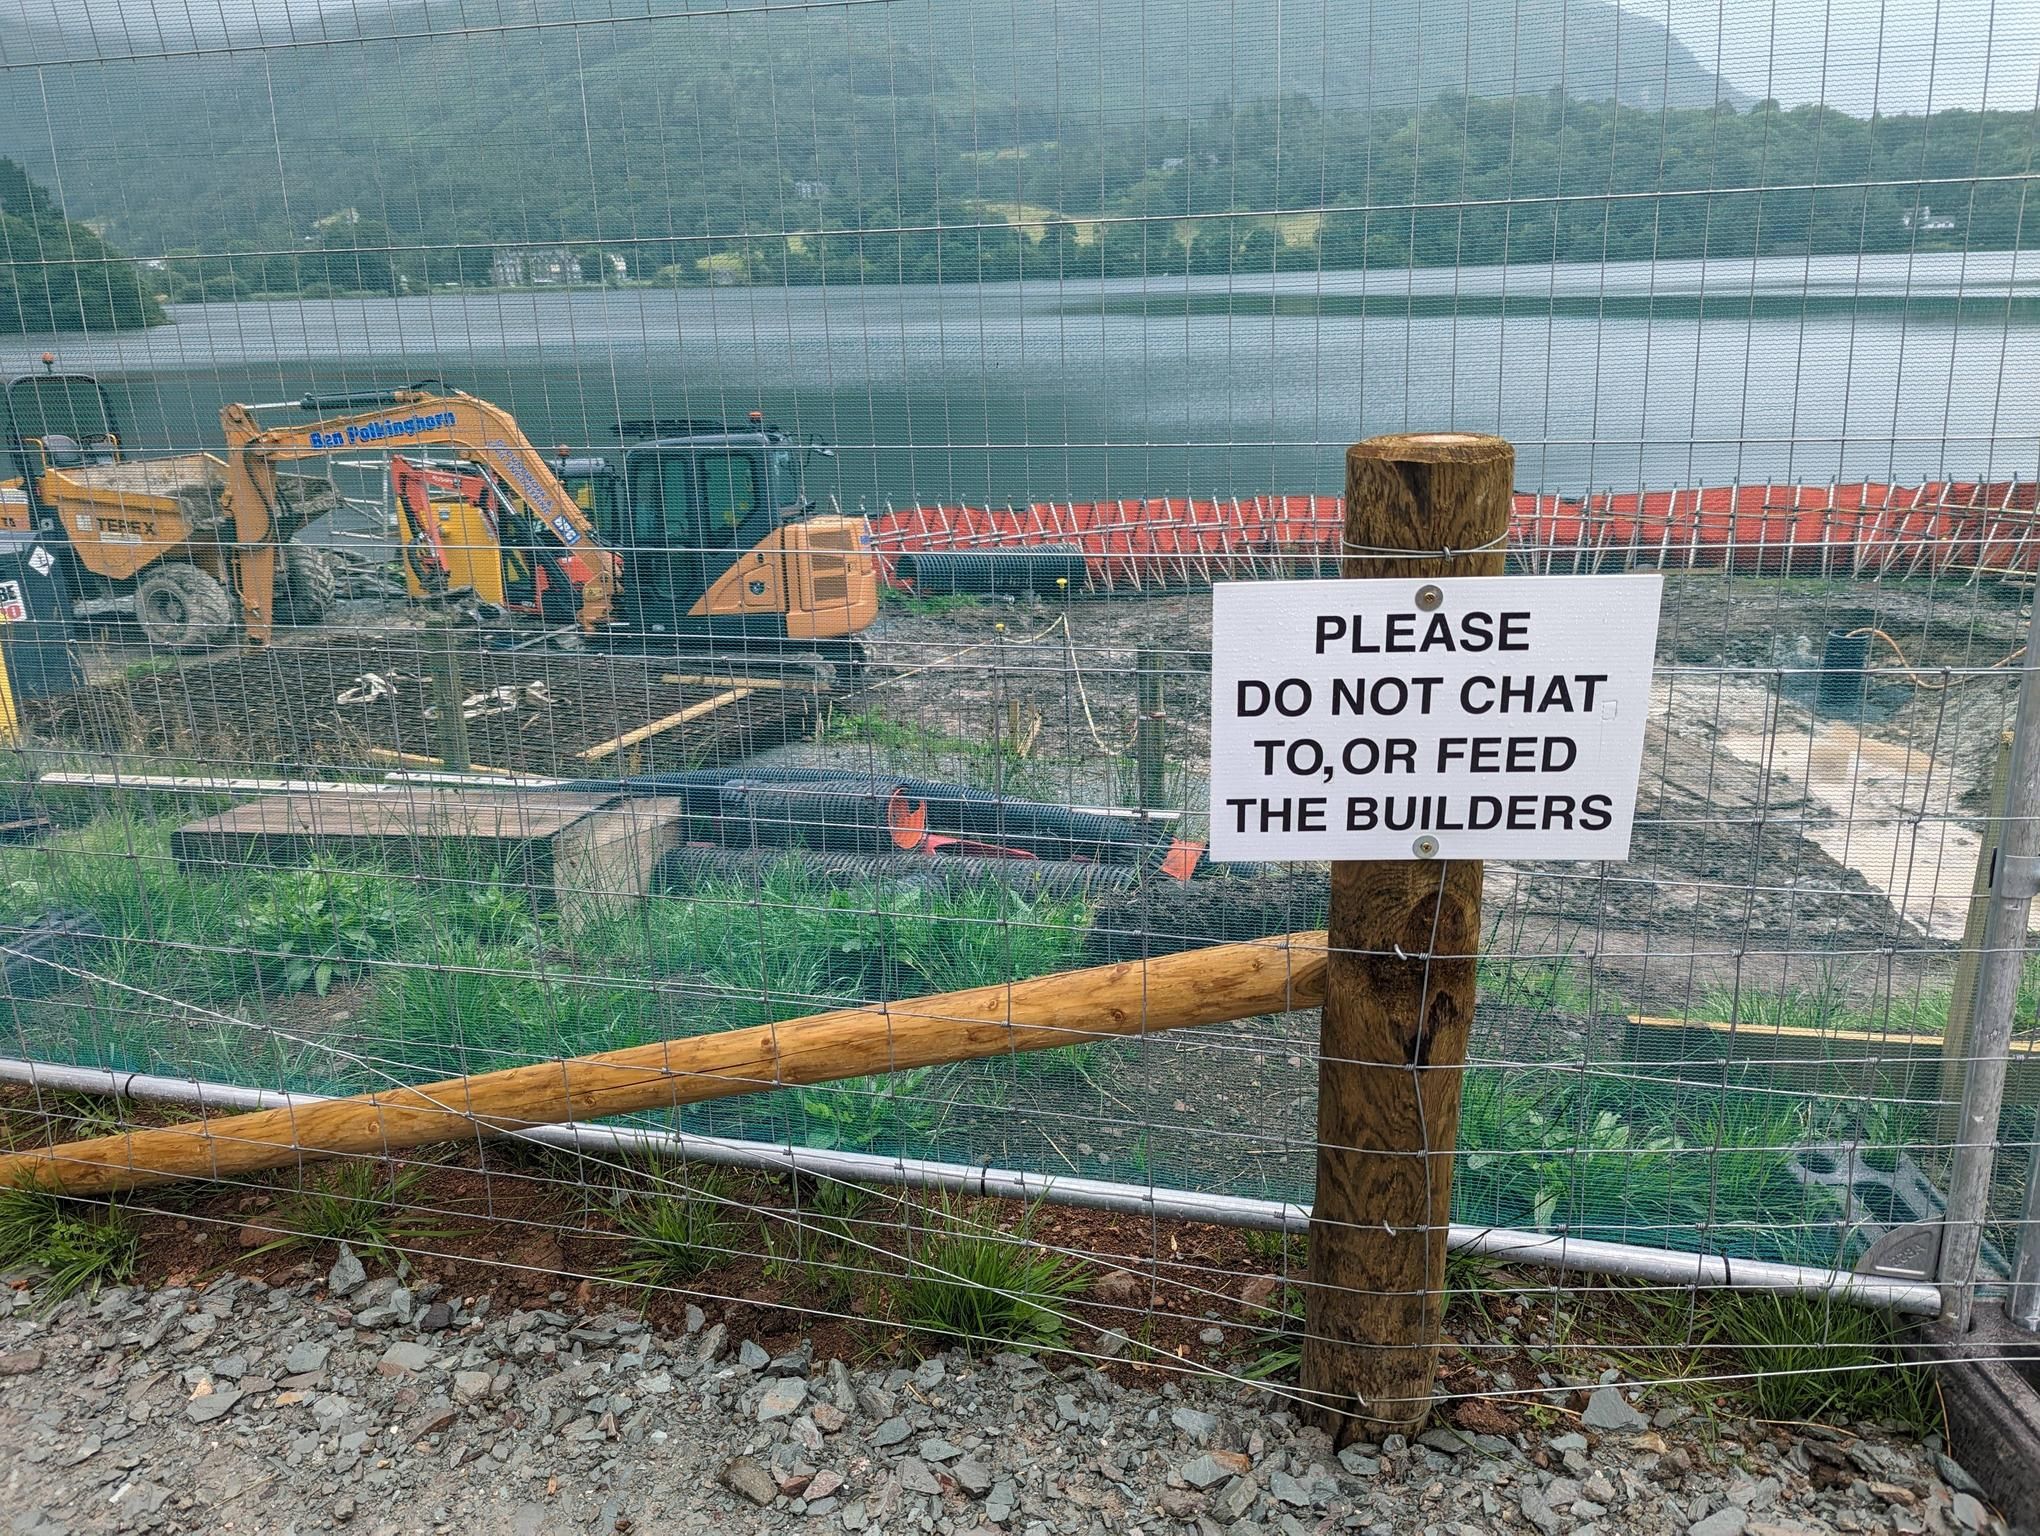 They'll ask everyone not to tap on the excavator's windows next